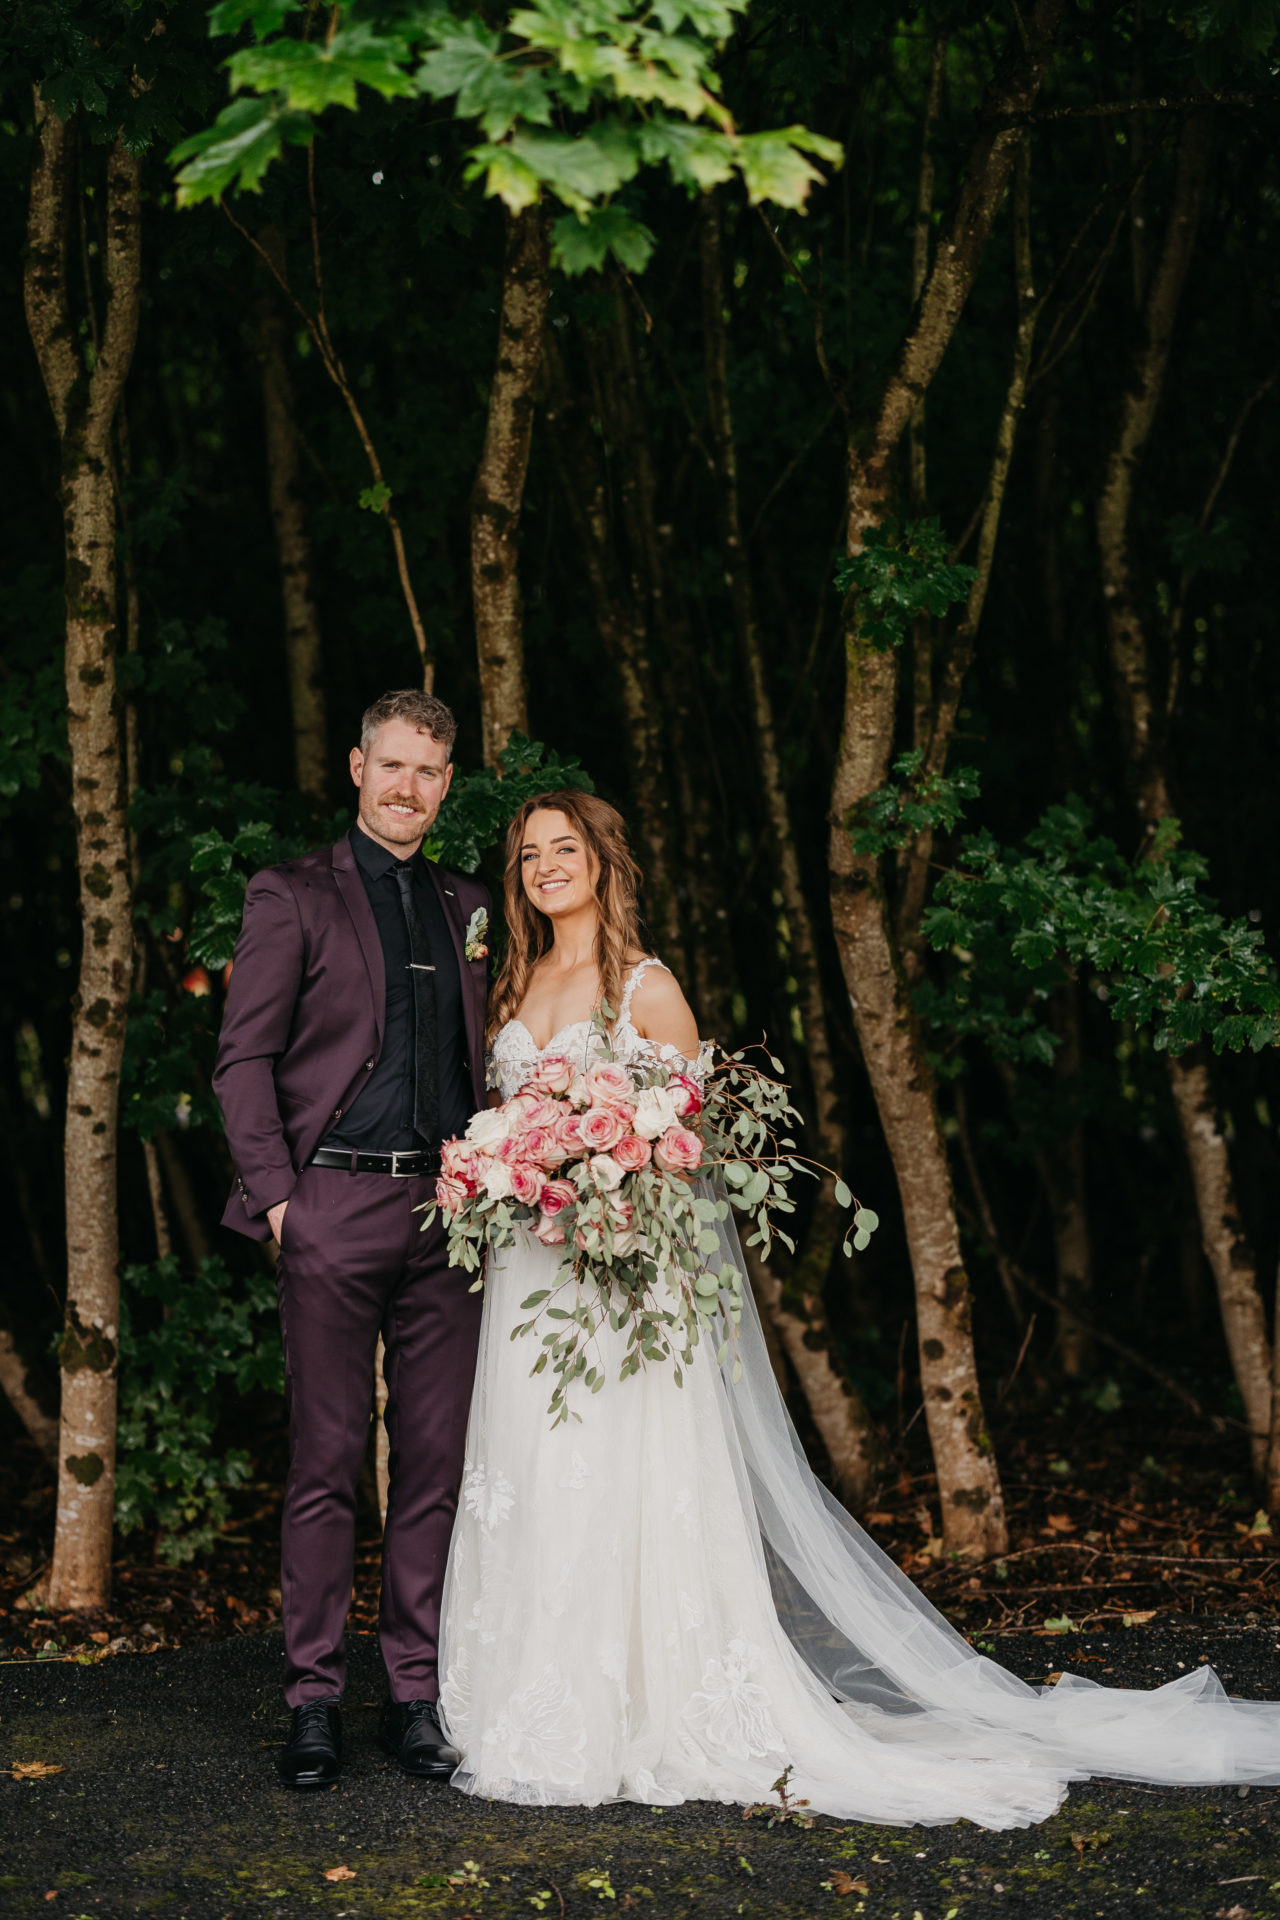 Shane Hunter and Briona Reynolds on their wedding day. Image: Moat Hill Photography